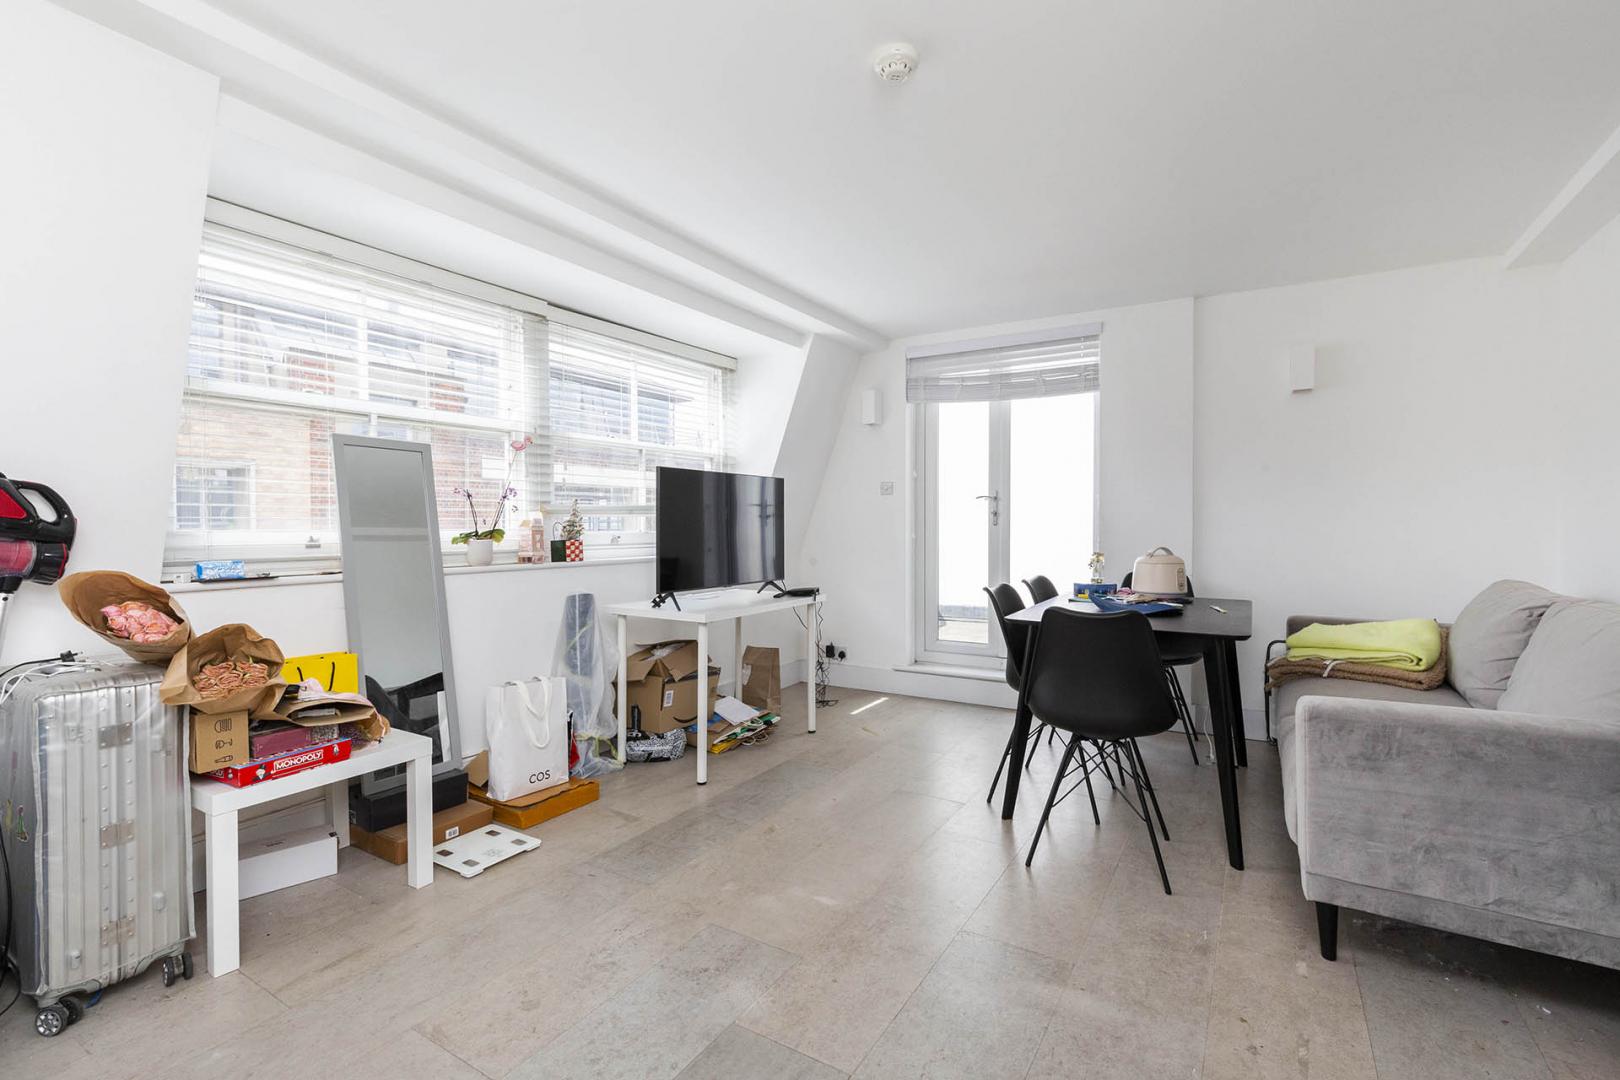 2 bed 2 bath warehouse apartment in the Clerkenwell area close to farringdon Great Sutton Street , Clerkenwell